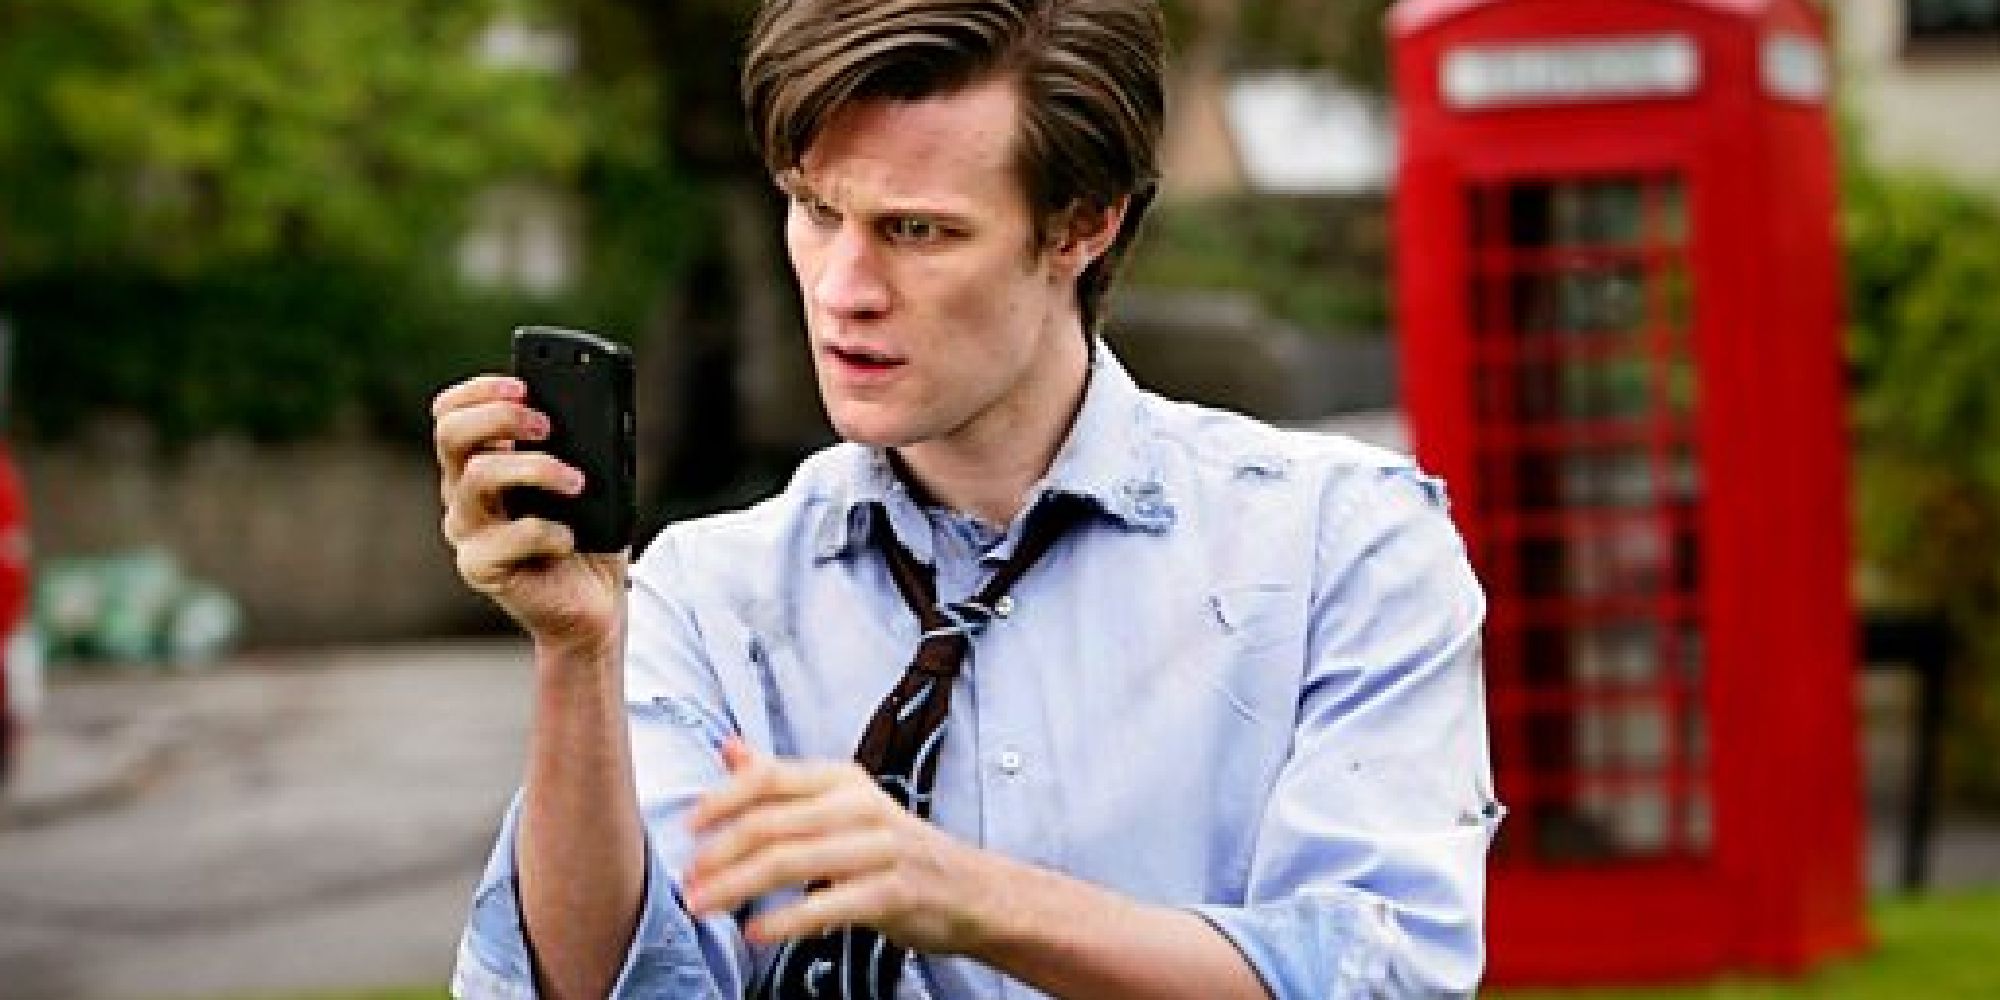 The 11th Doctor in the 10th Doctor's tattered clothes inspecting a mobile phone in front of a red phone box in Doctor Who's The Eleventh Hour